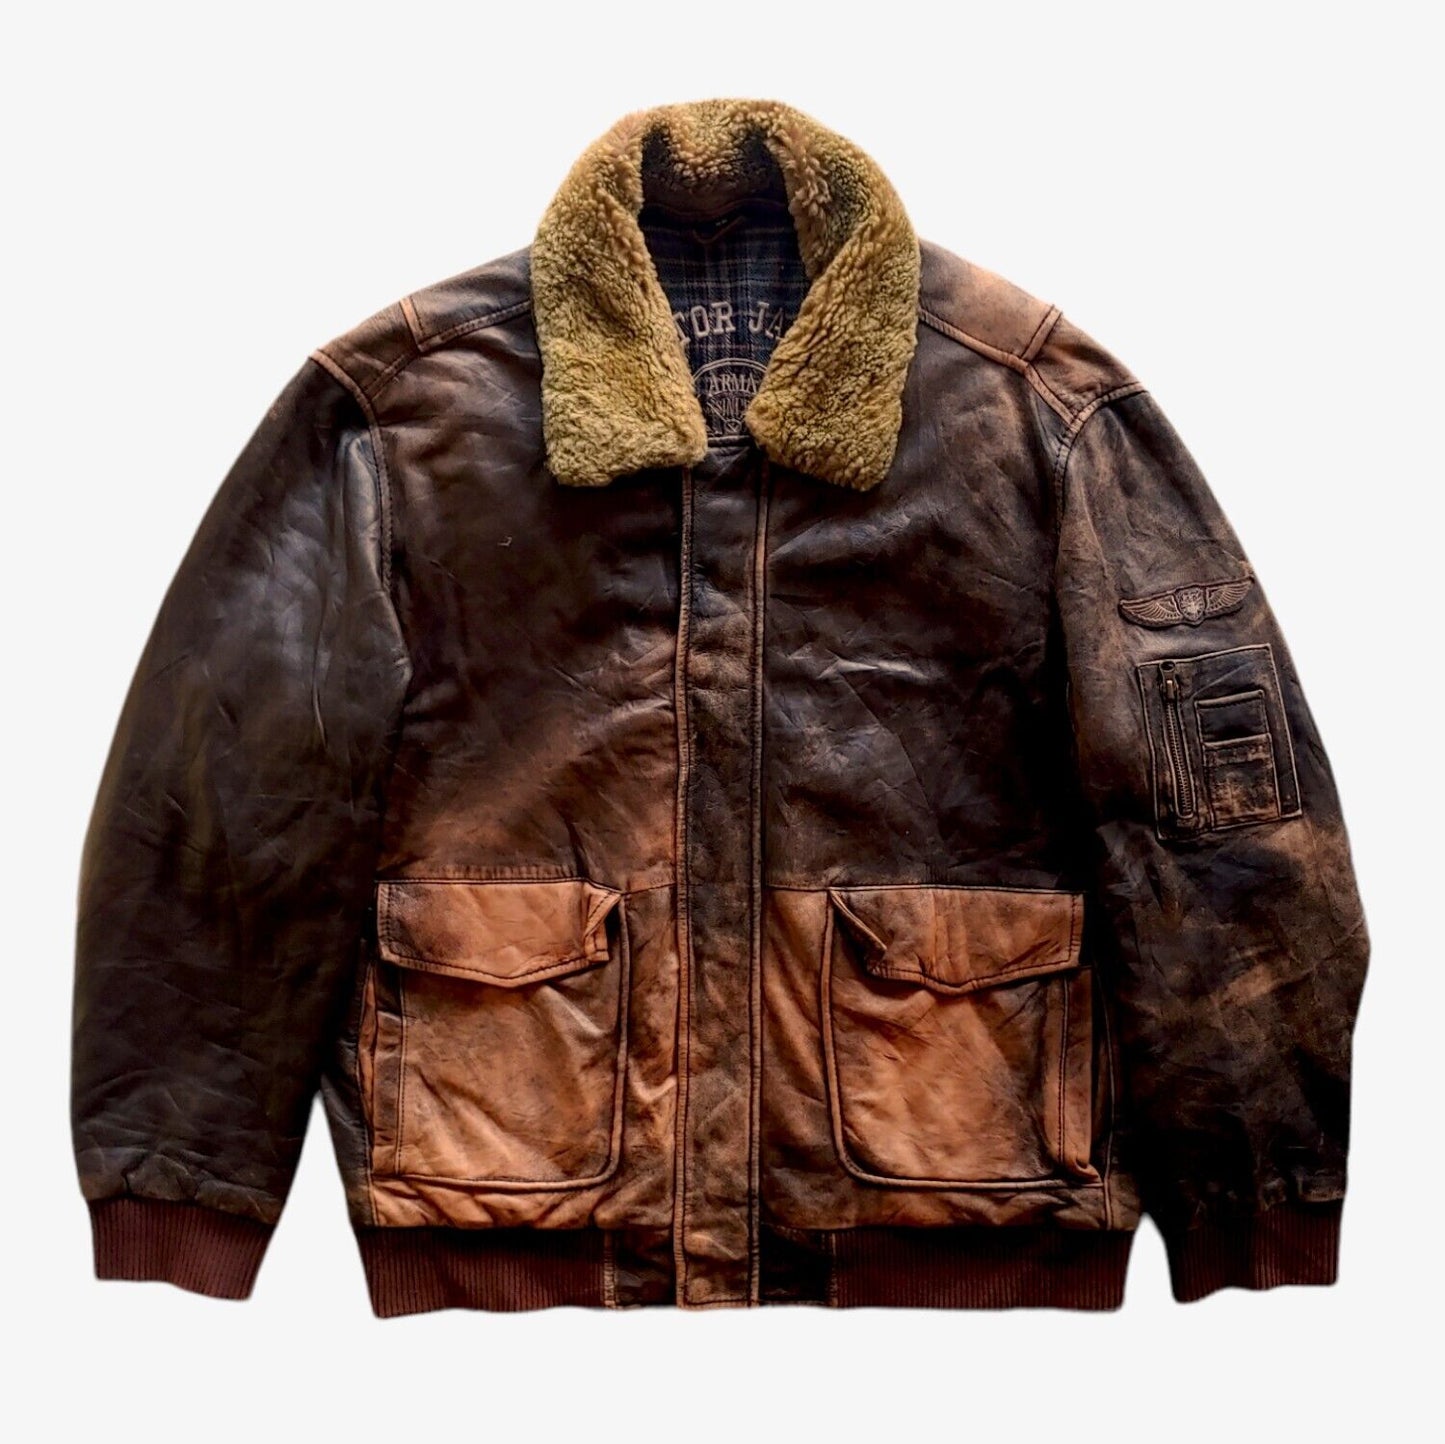 Vintage 1990s Arma Aviation Brown Leather Pilot Jacket With Fur Collar - Casspios Dream